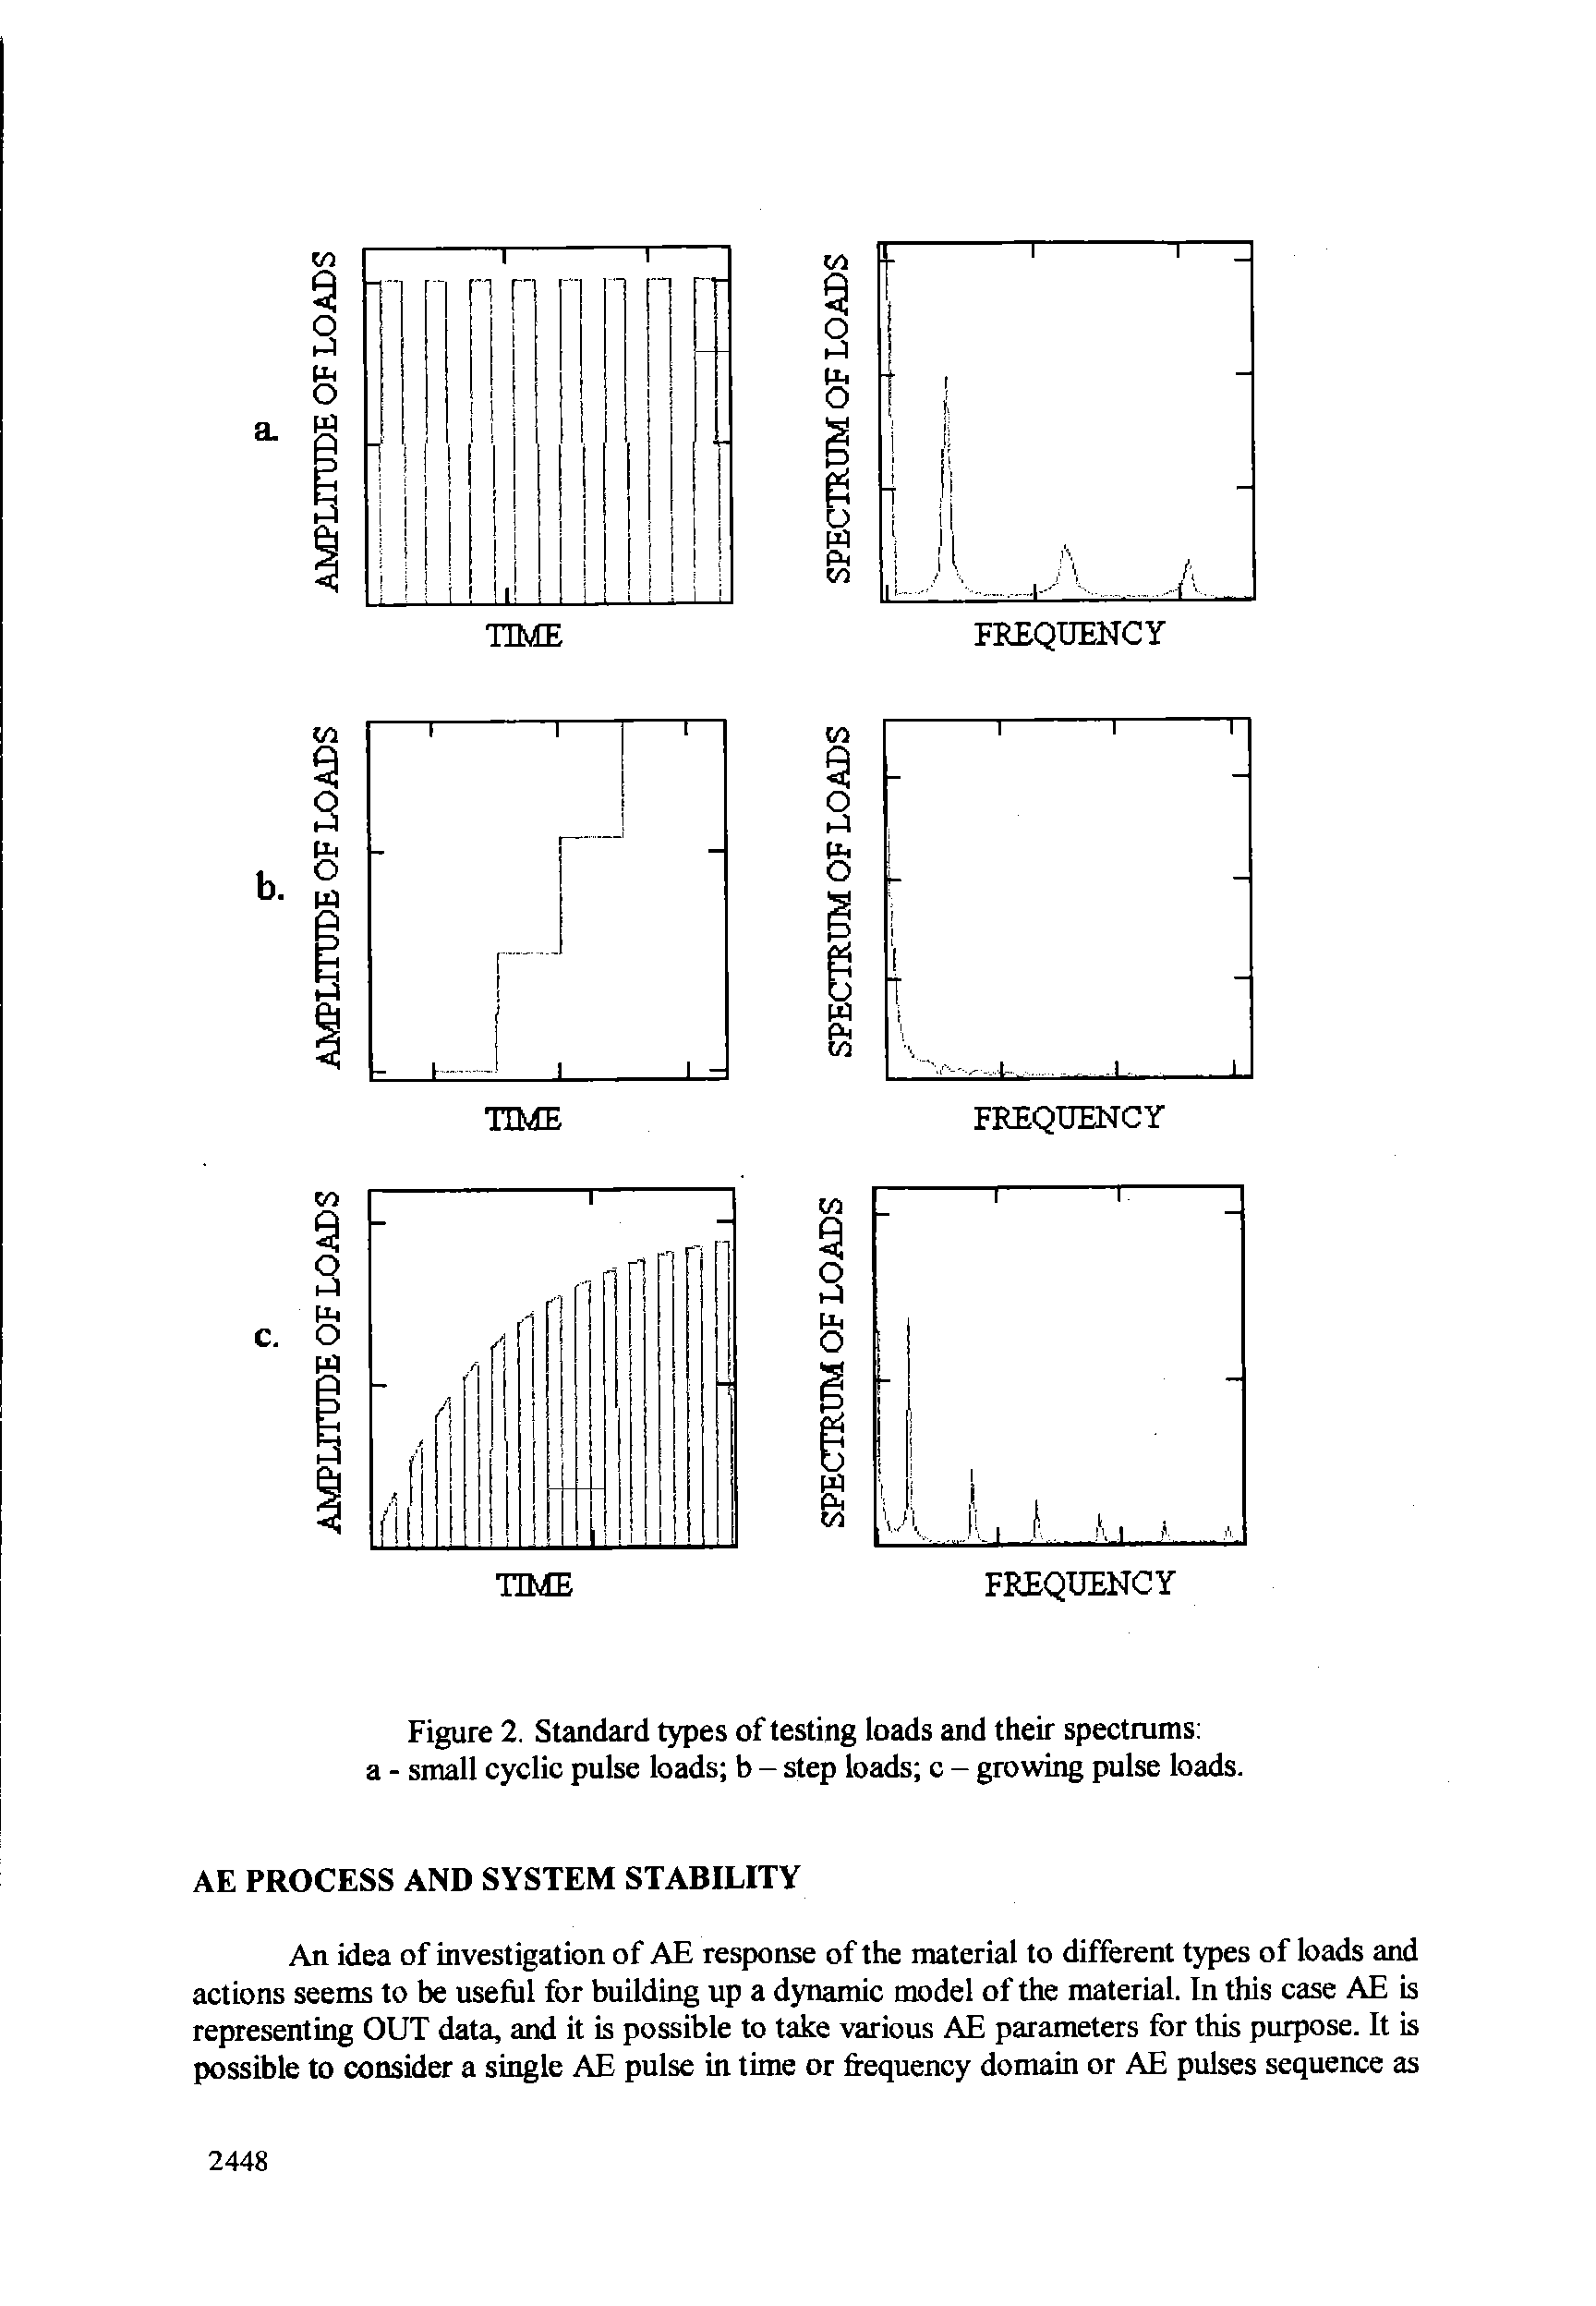 Figure 2. Standard types of testing loads and their spectrums a - small cyclic pulse loads b - step loads c - growing pulse loads.